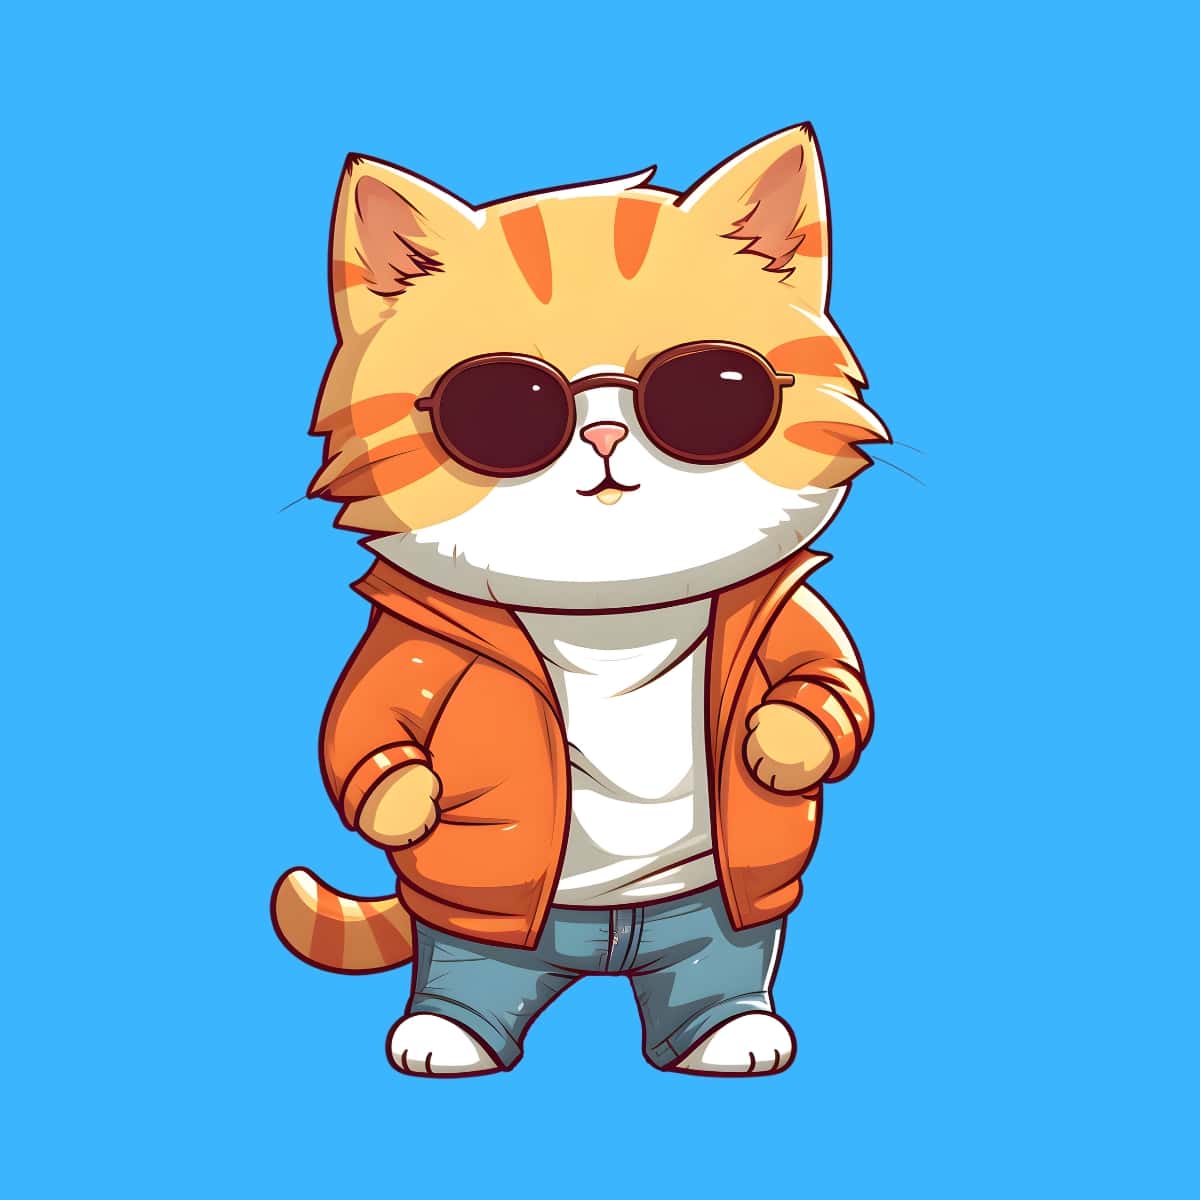 Cartoon graphic of cat with sunglasses standing looking cool wearing jacket on a blue background.